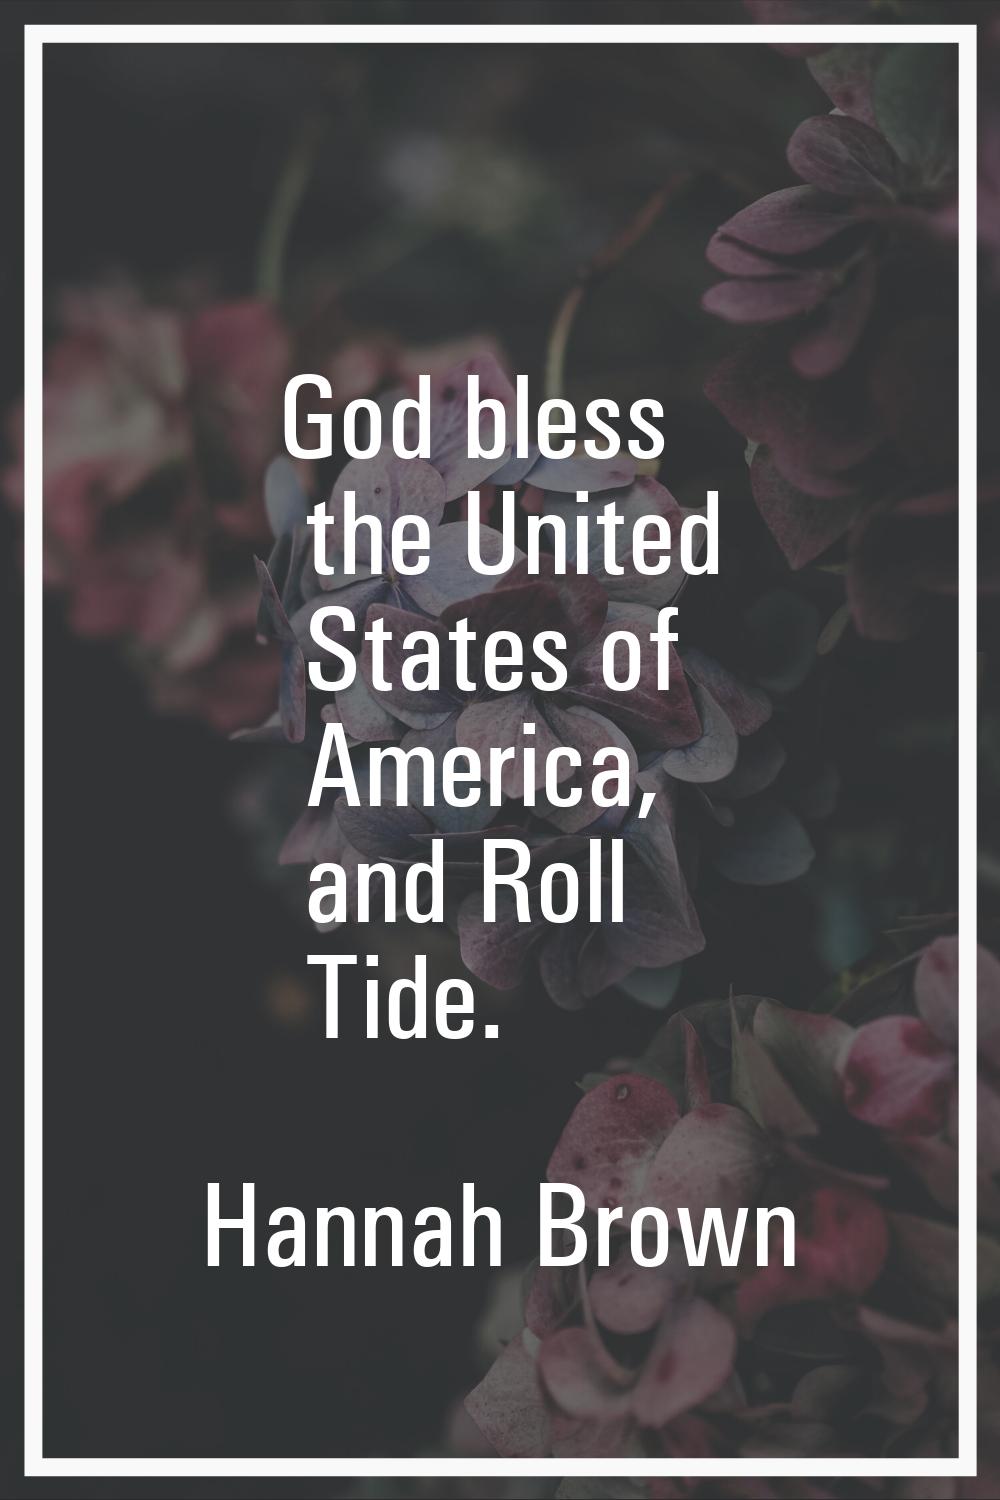 God bless the United States of America, and Roll Tide.